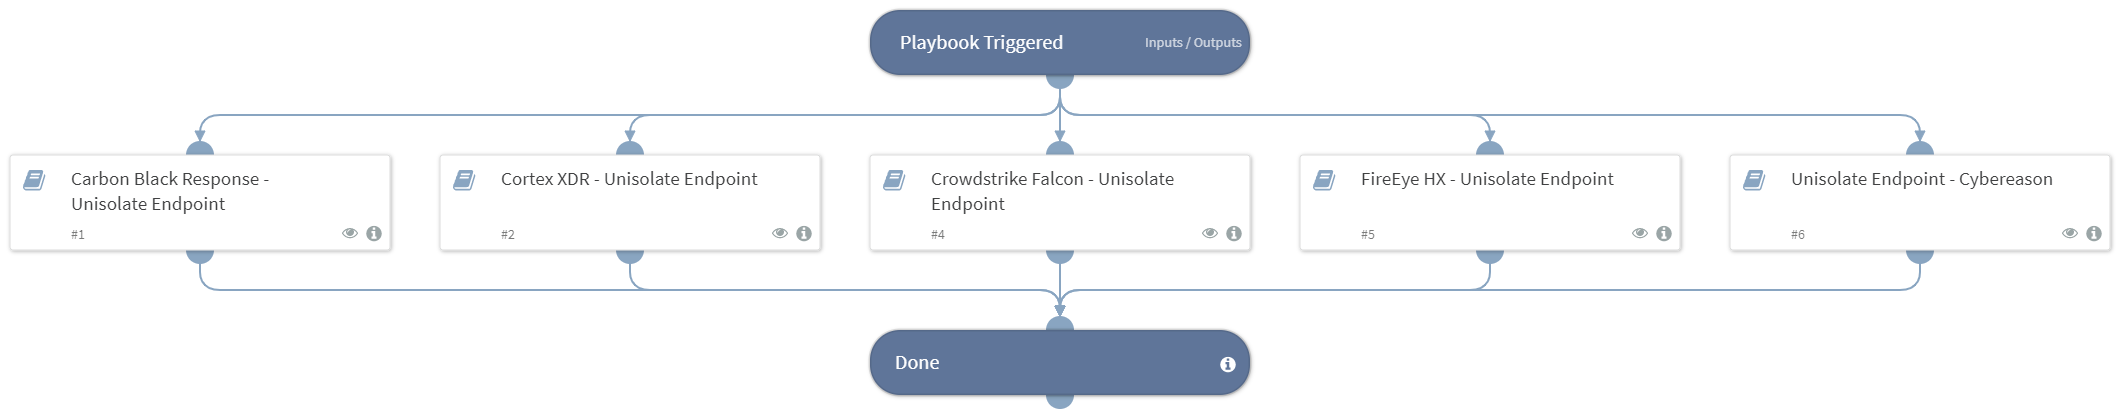 Unisolate Endpoint - Generic